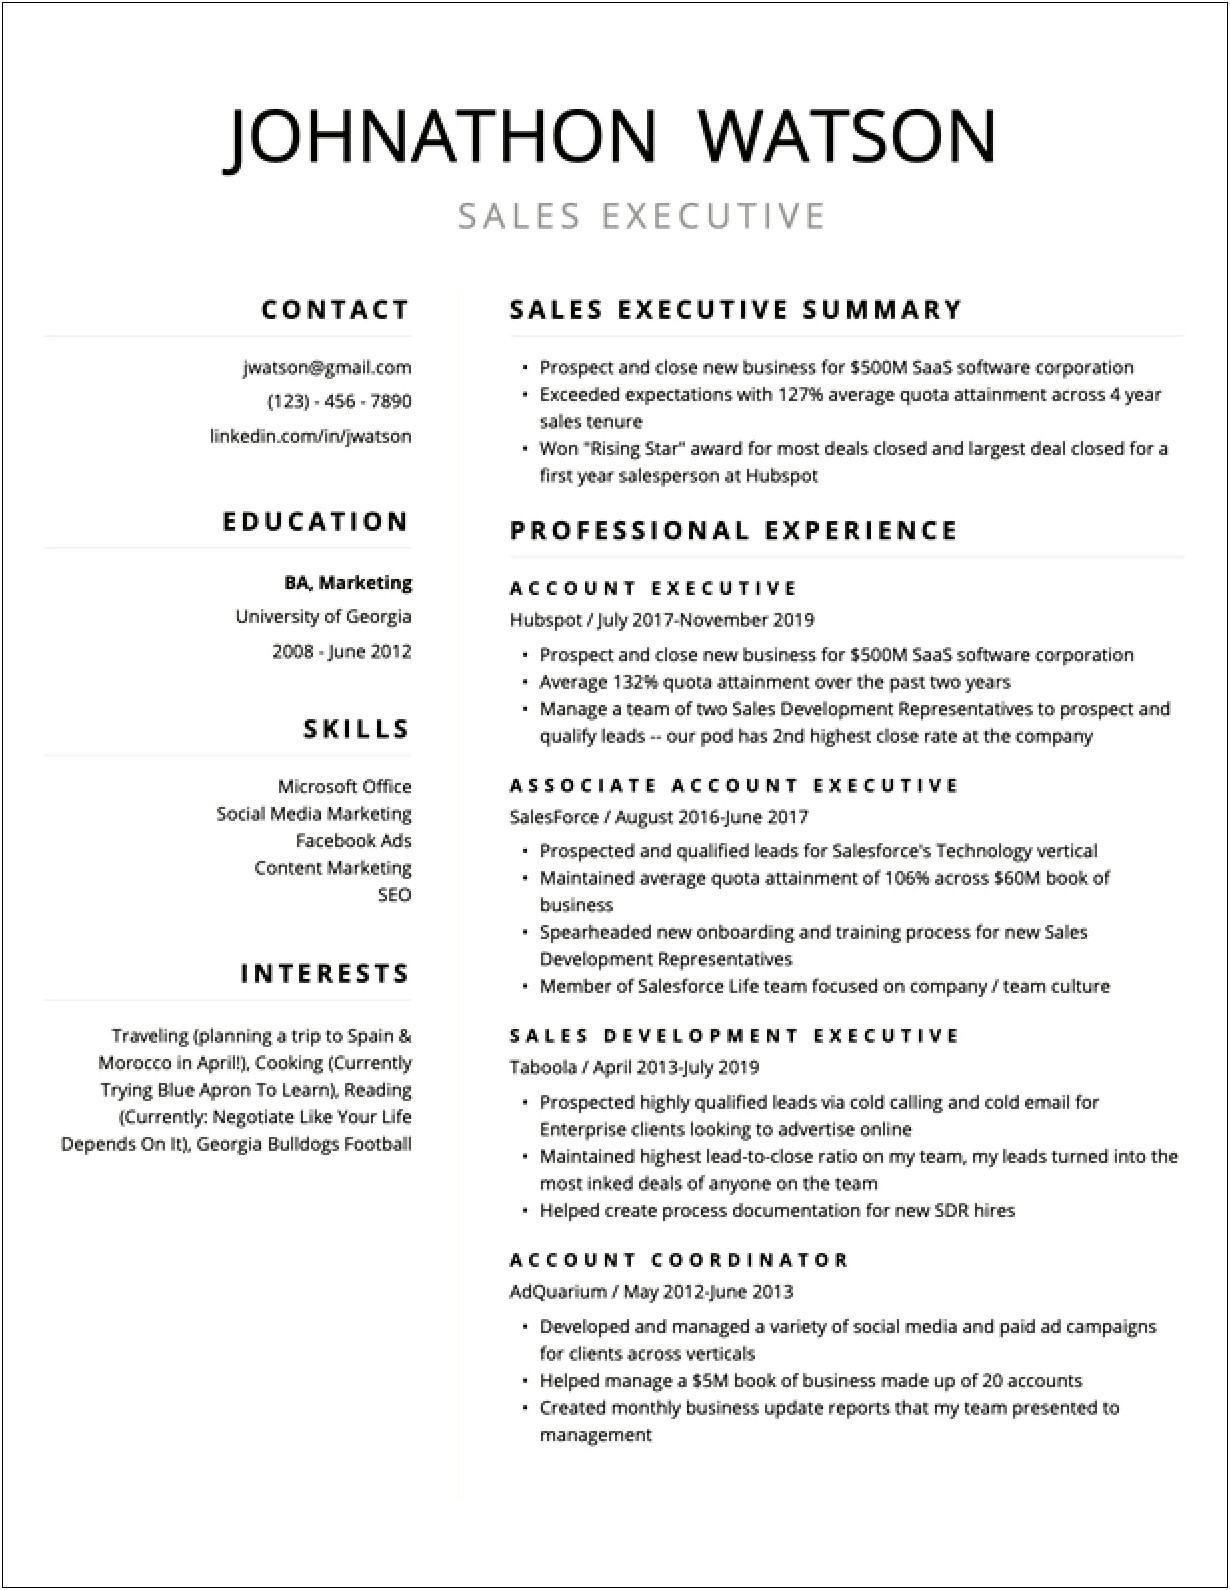 Sample Resumes For Jobs In Canada